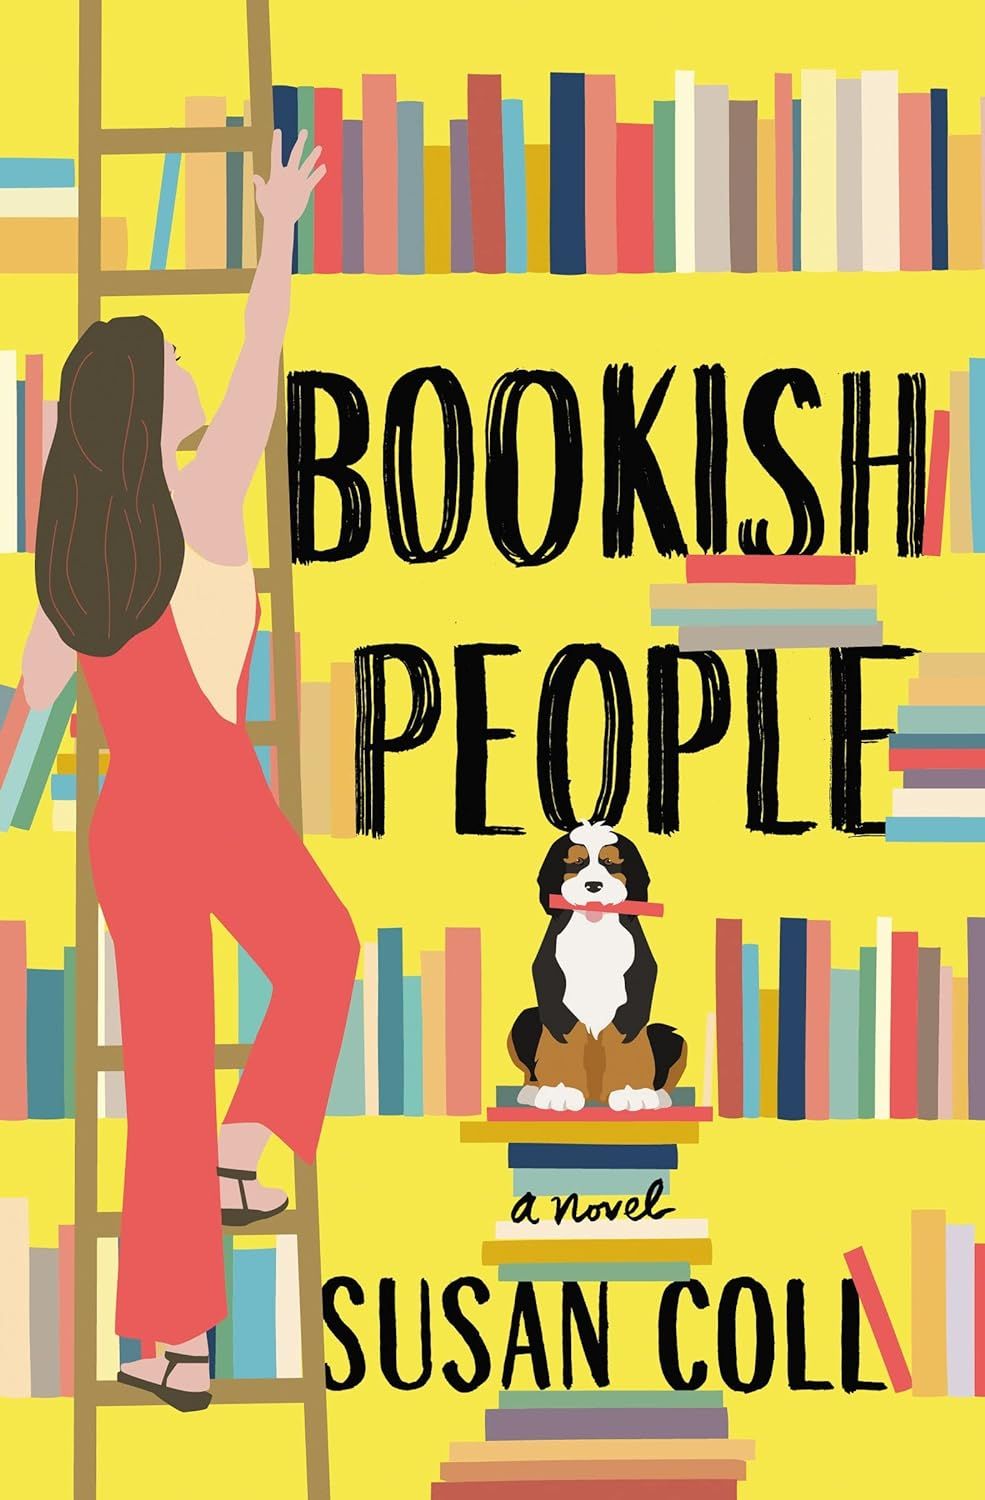 Bookish People by Susan Coll - book cover